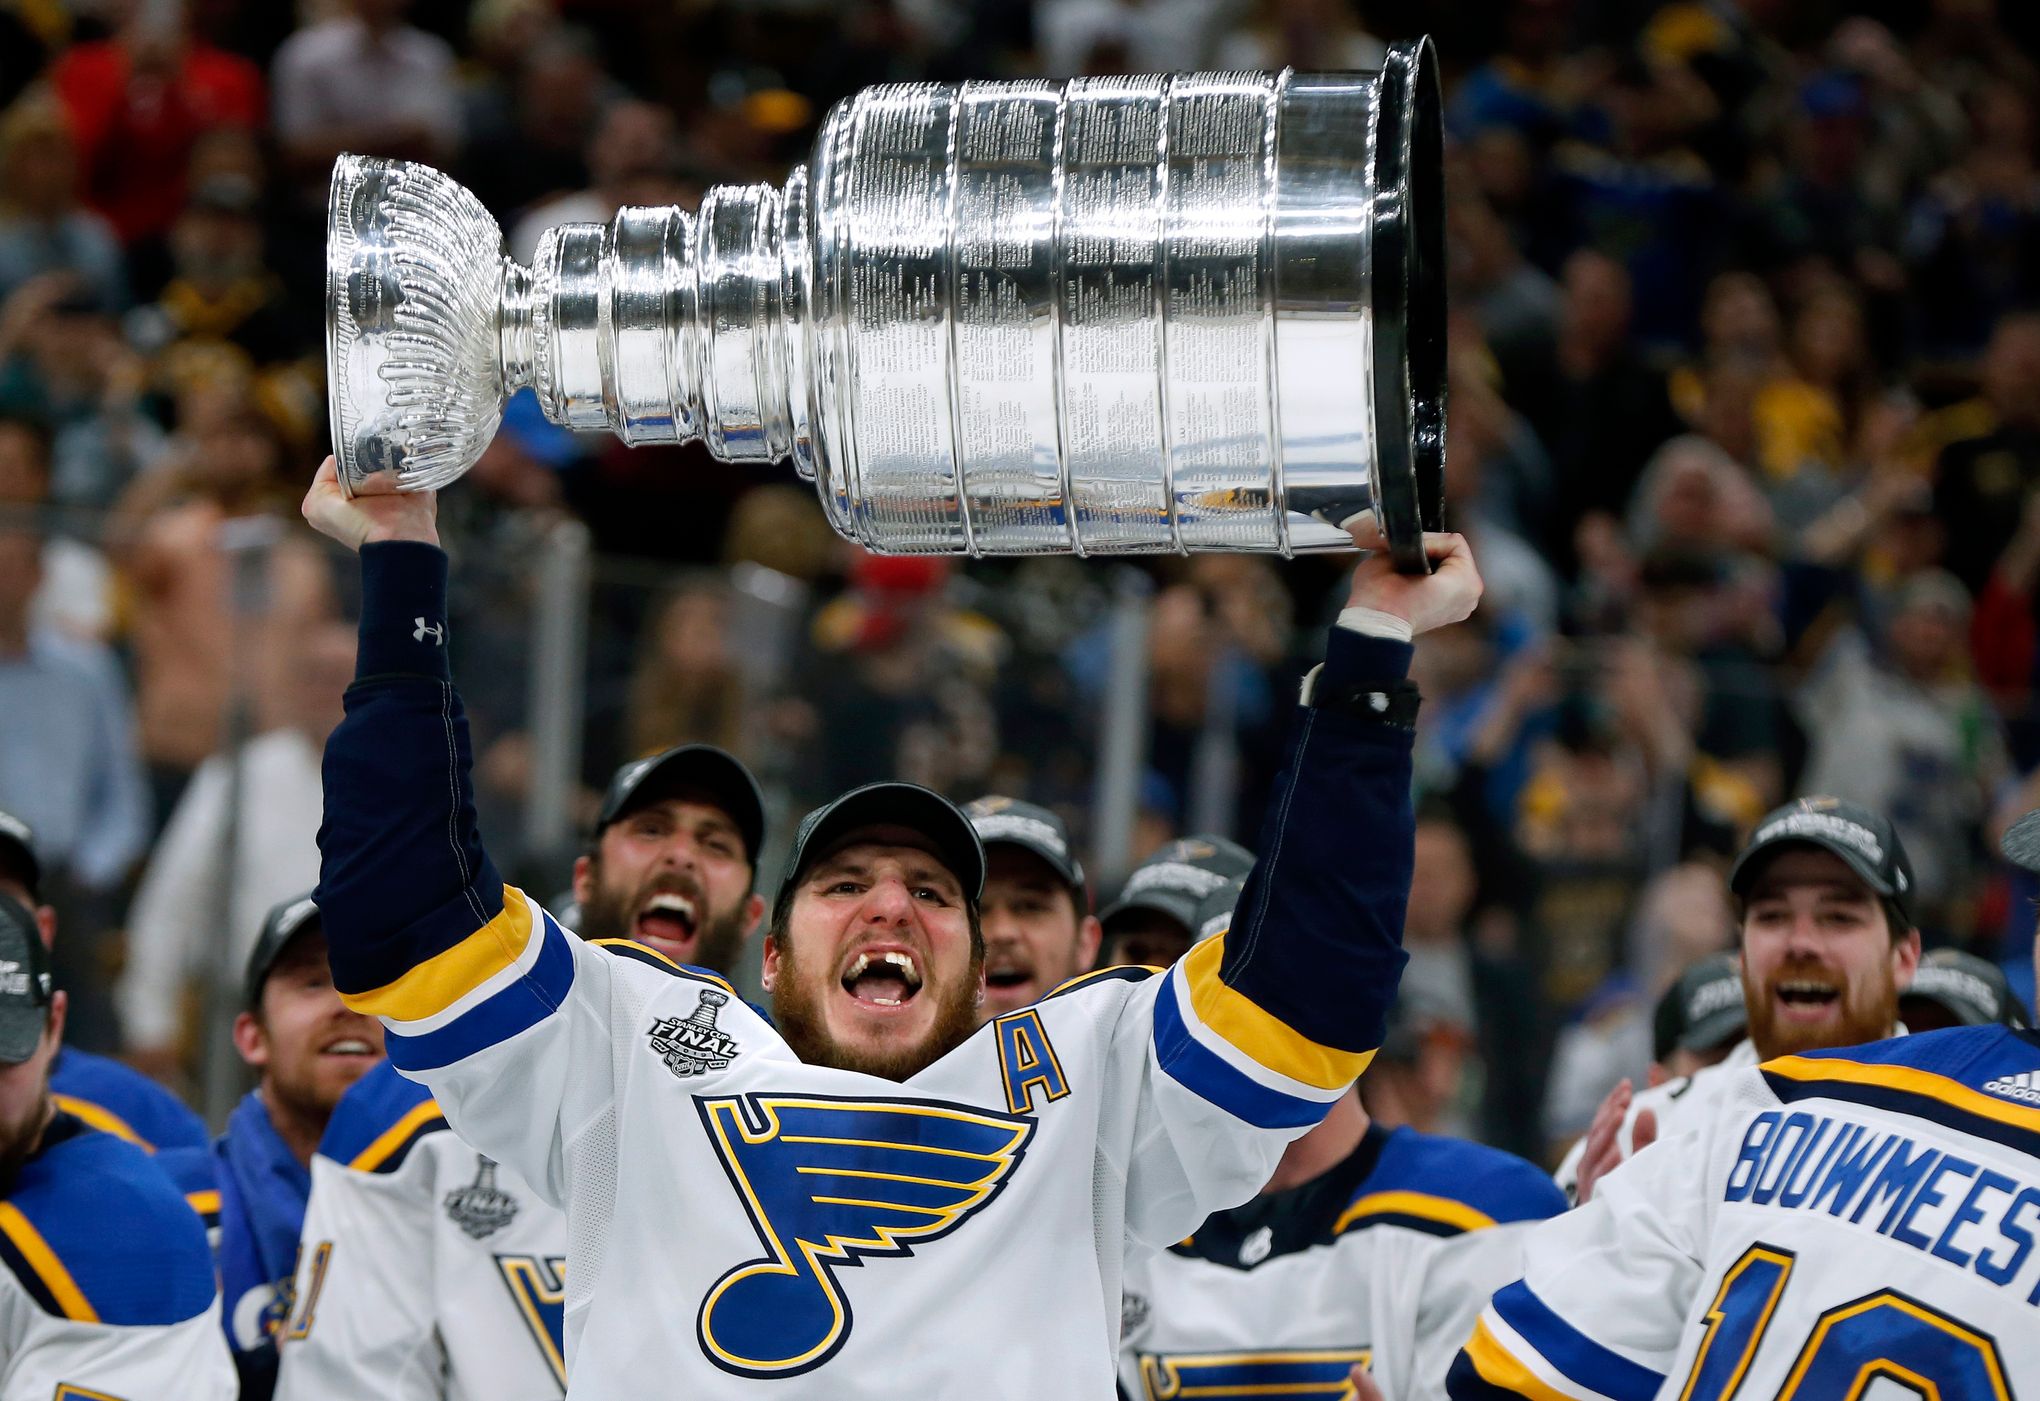 https://images.seattletimes.com/wp-content/uploads/2019/06/urn-publicid-ap-org-fbbca4e8eee04f78abfbbf4521992c28Stanley_Cup_Blues_Bruins_Hockey_85134.jpg?d=2040x1401